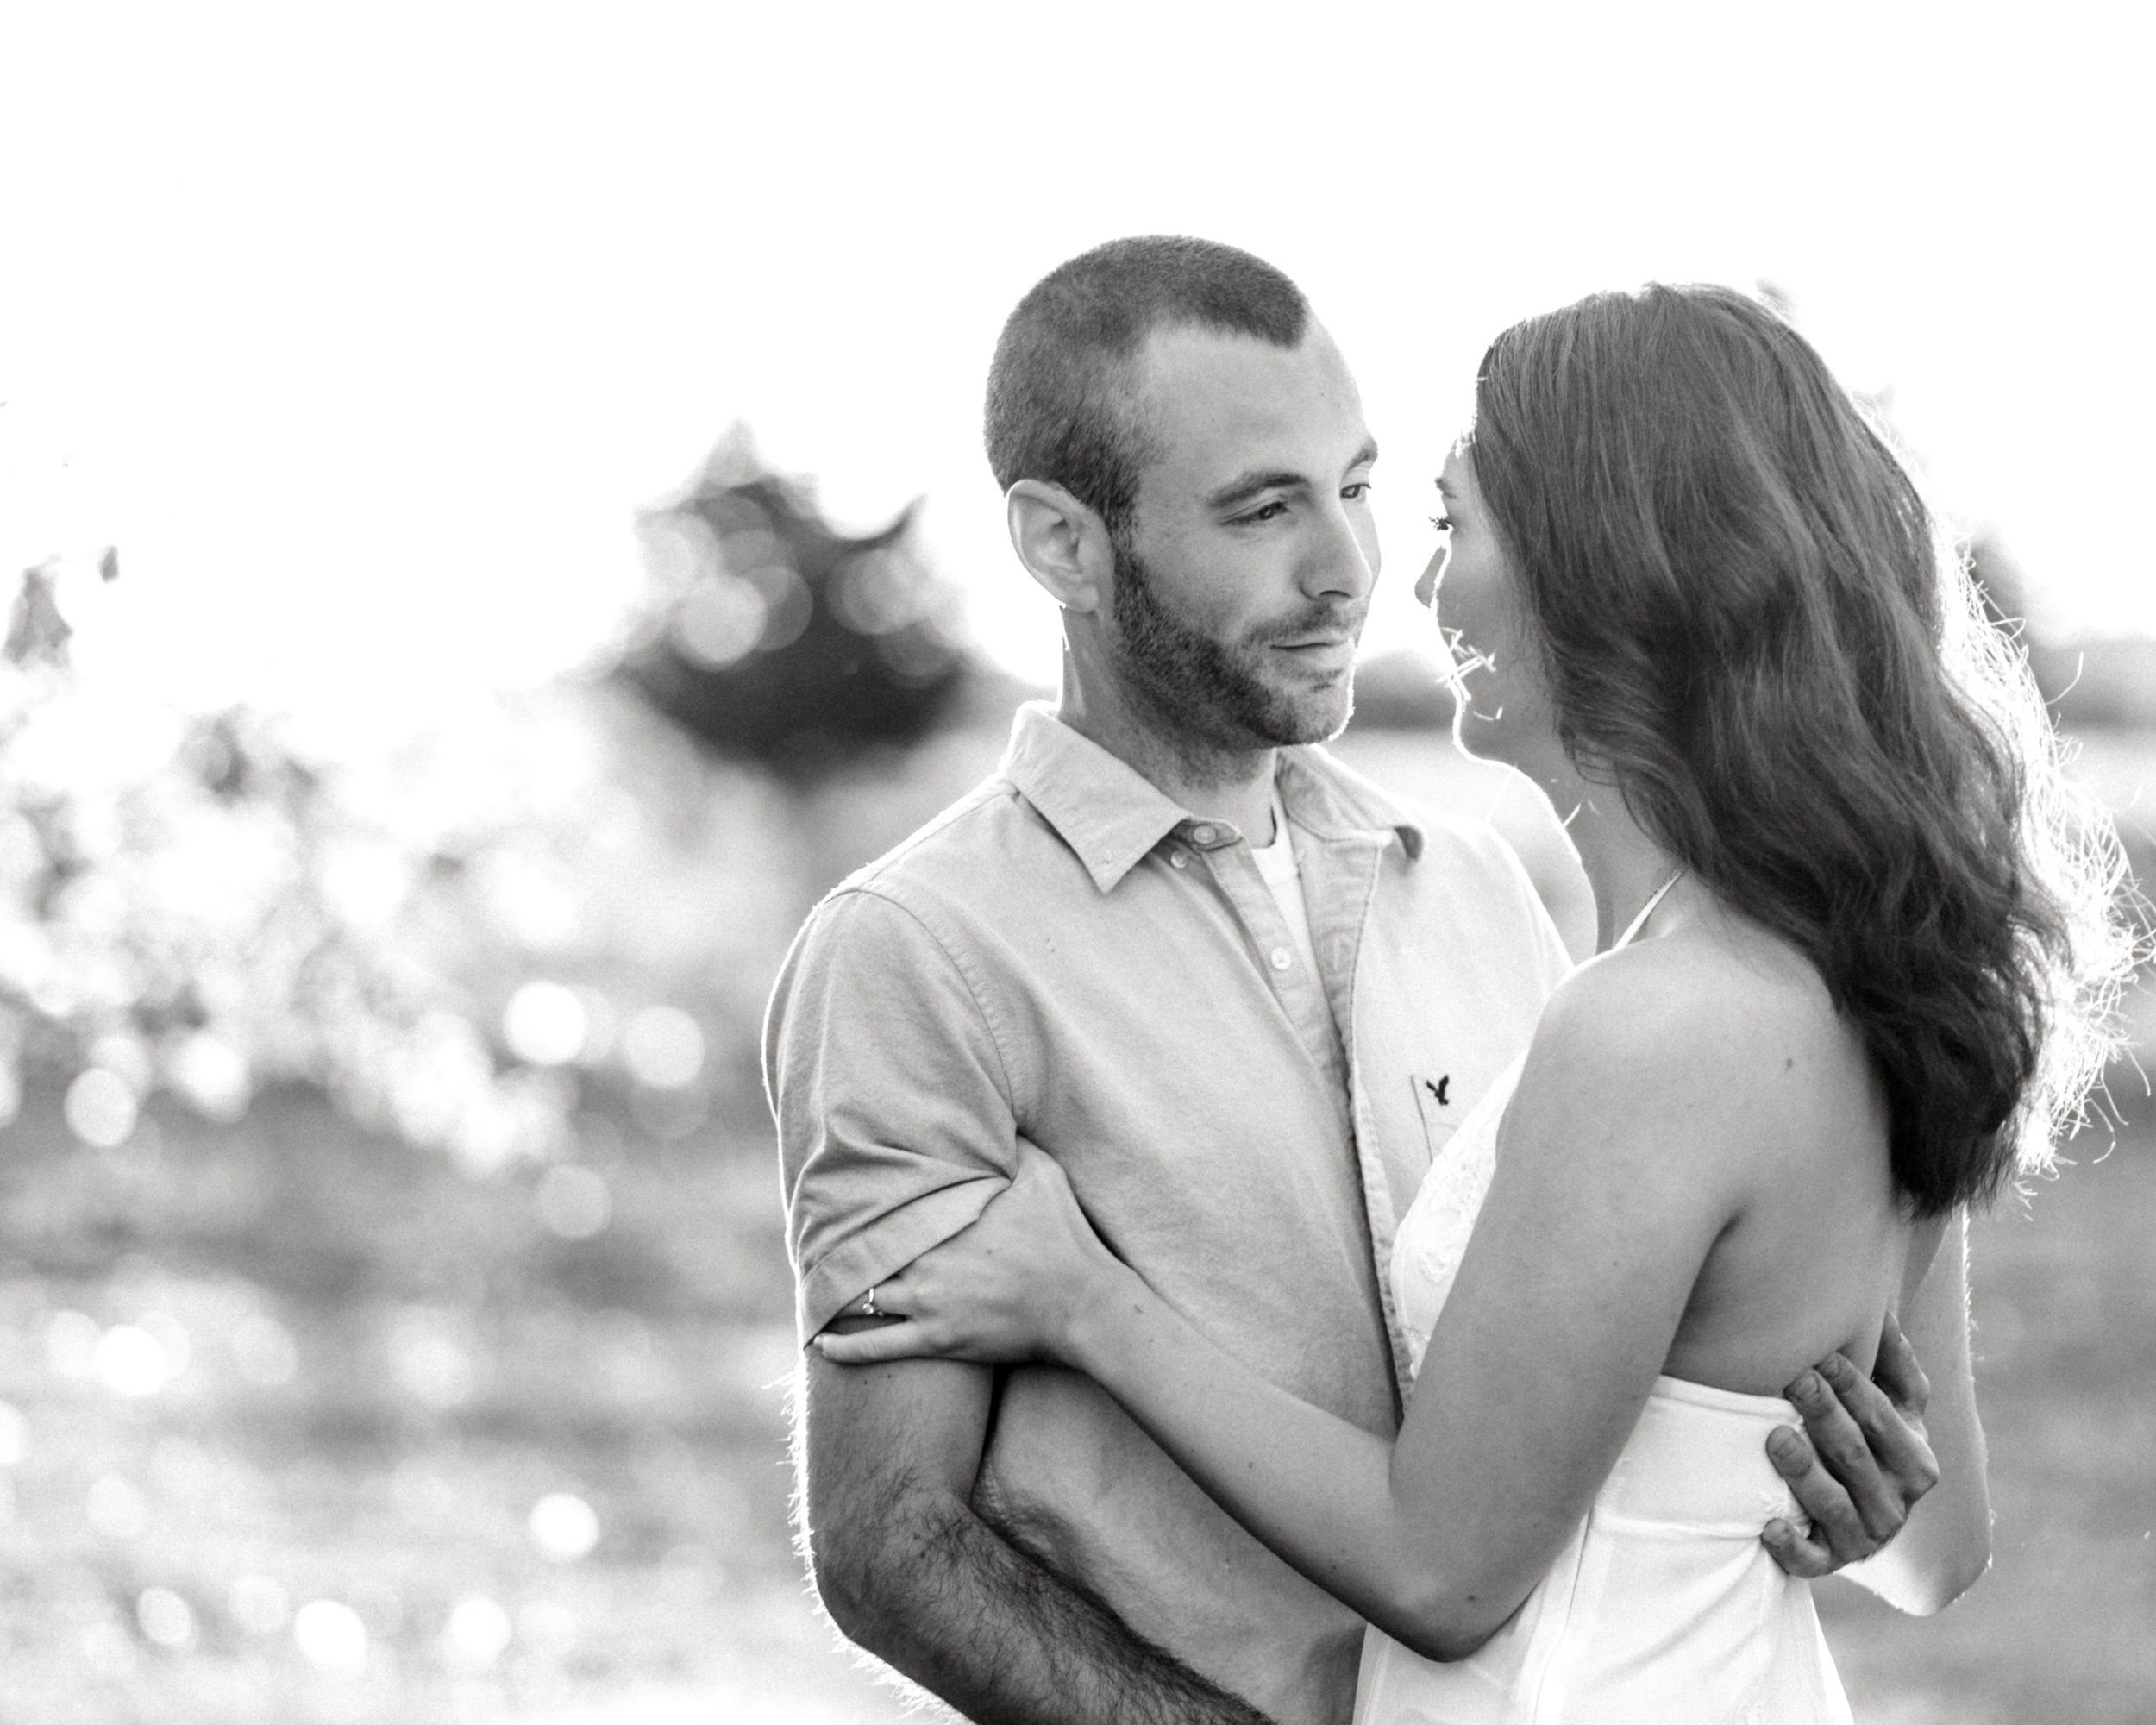 Black and white engagement photo ideas for classic engagement pictures.